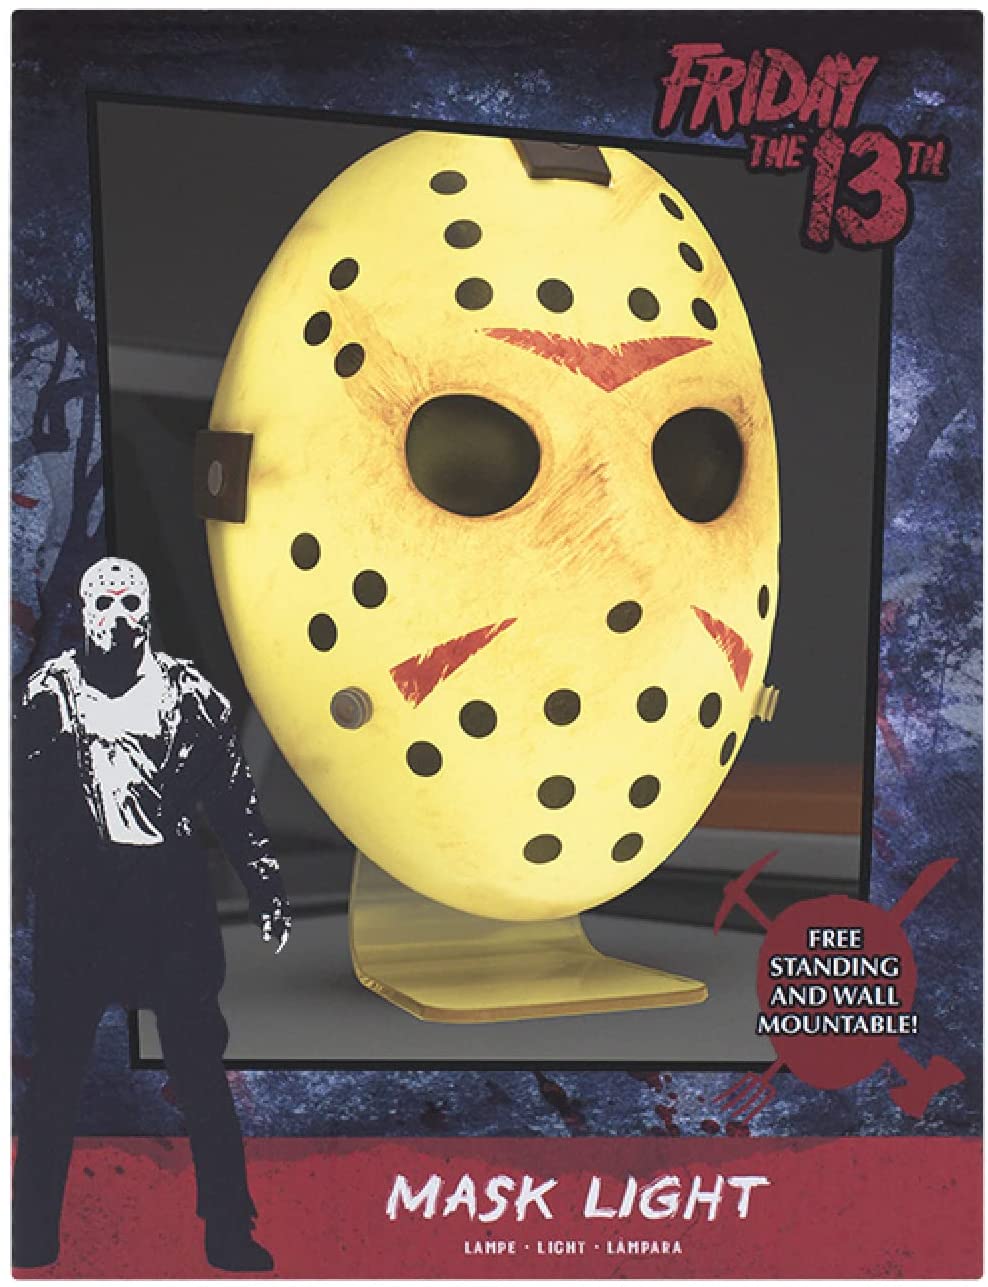 Friday The 13th Mask Light